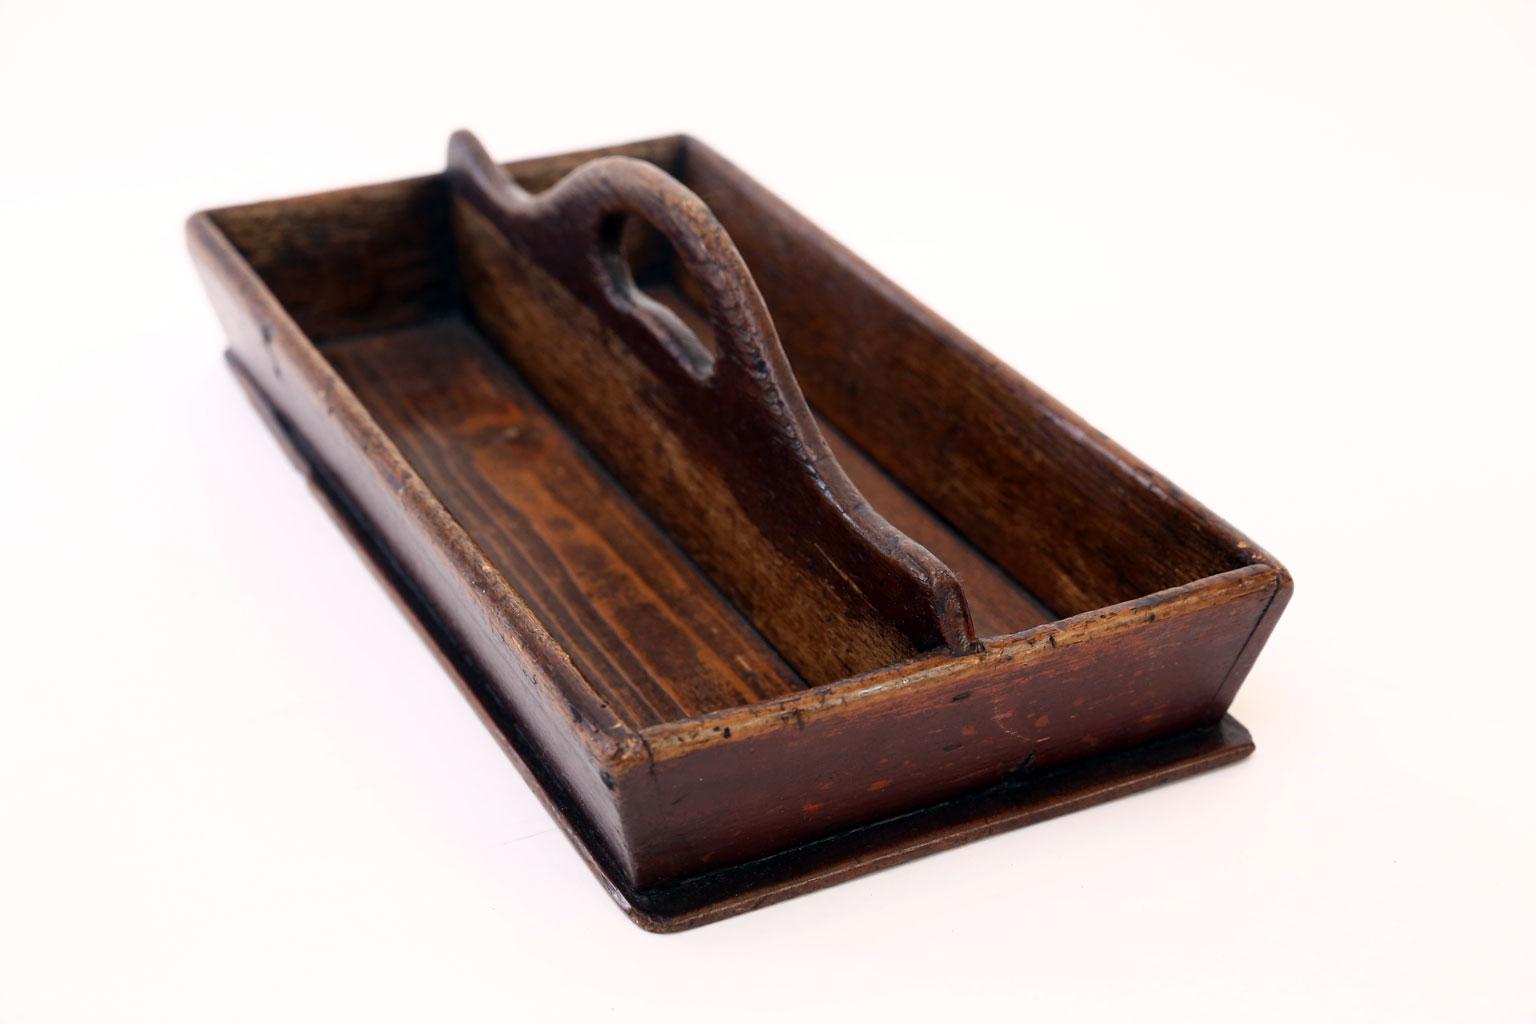 Brown painted pine cutlery caddy (or cutlery tray), dates to the 19th century, England. Beautiful patina and color.